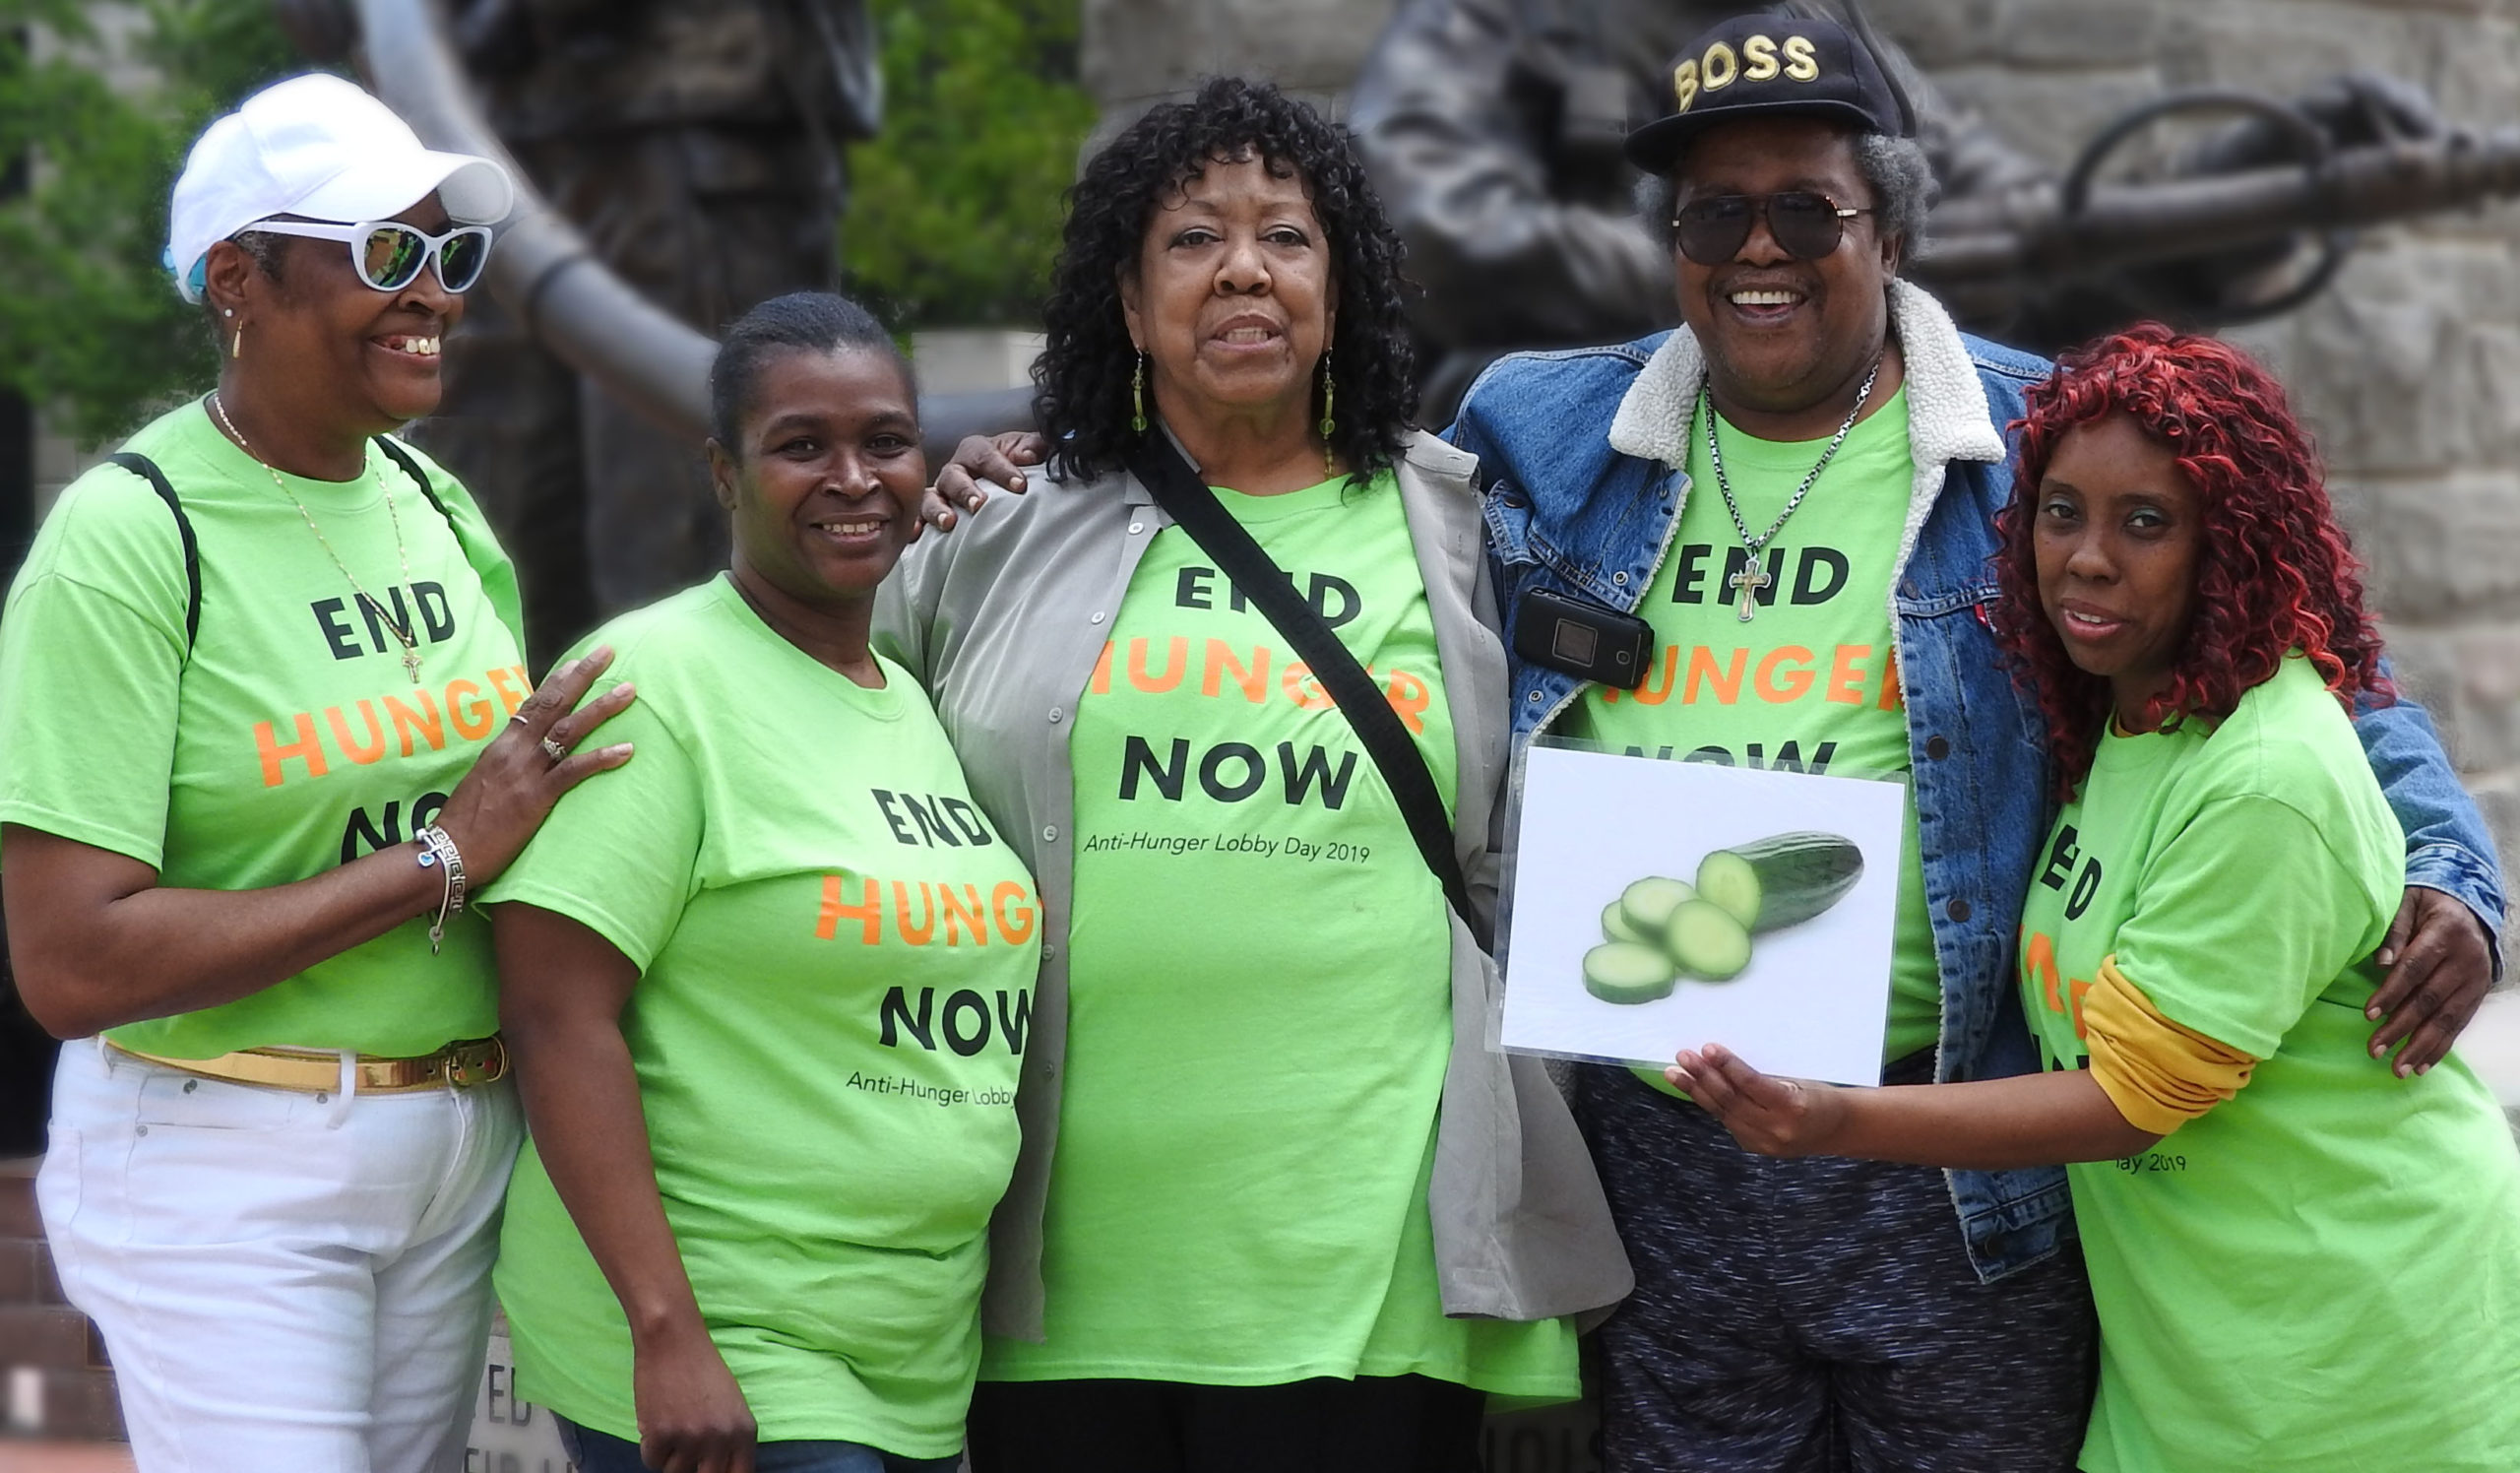 Five women wearing matching green End Hunger Now shirts pose for a photo